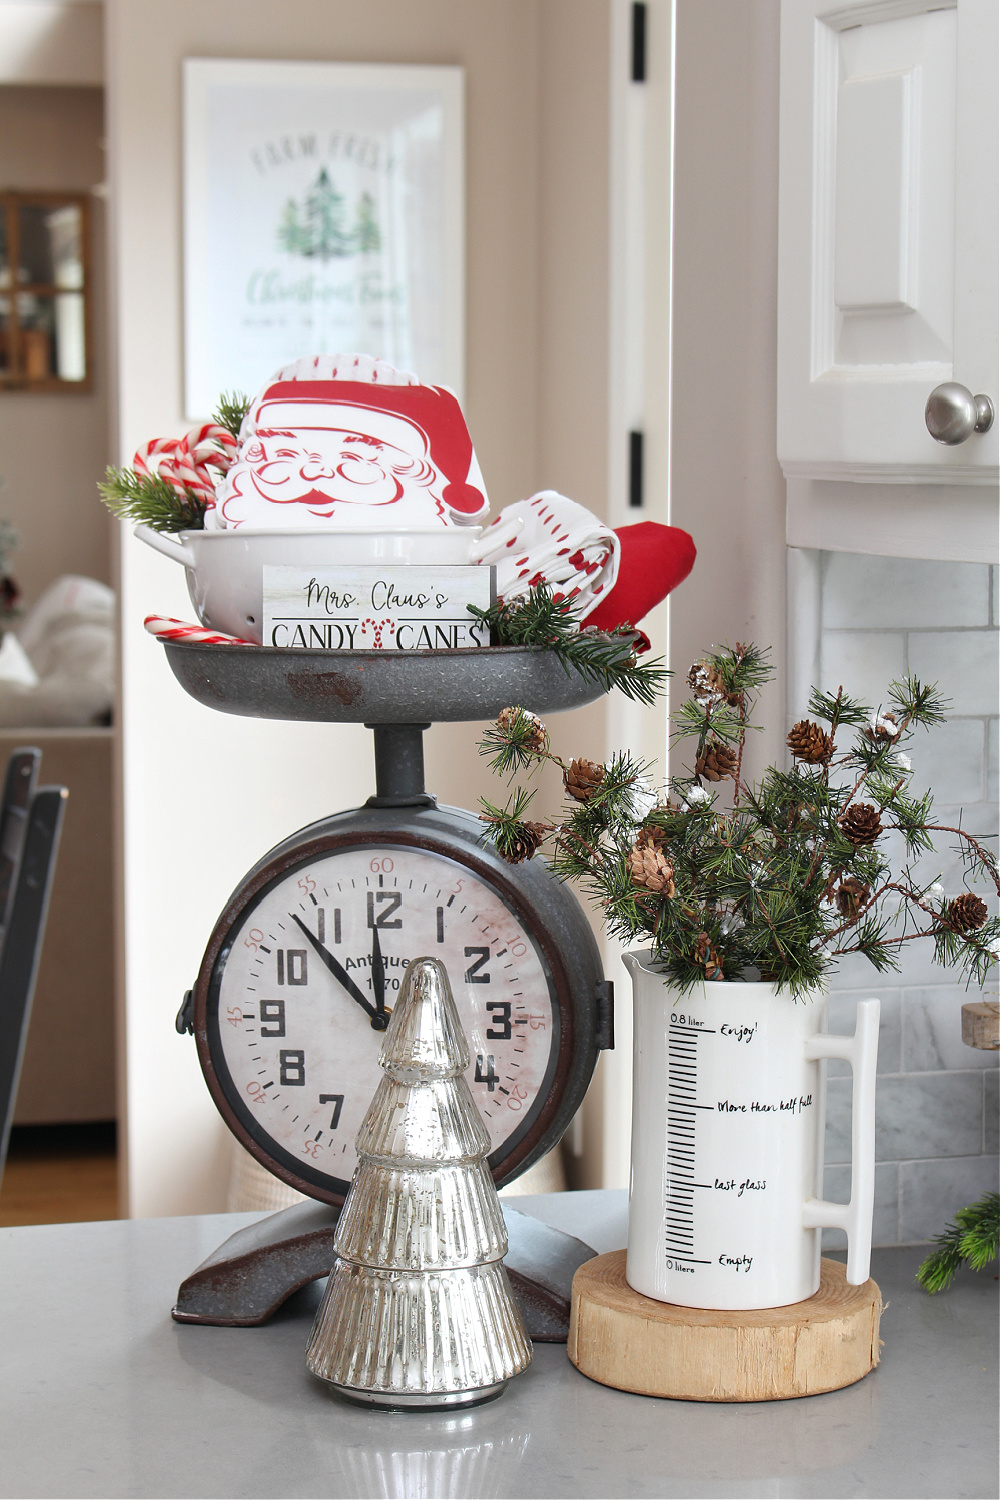 Christmas vignette with vintage inspired clock, red dish towels and Santa napkins.